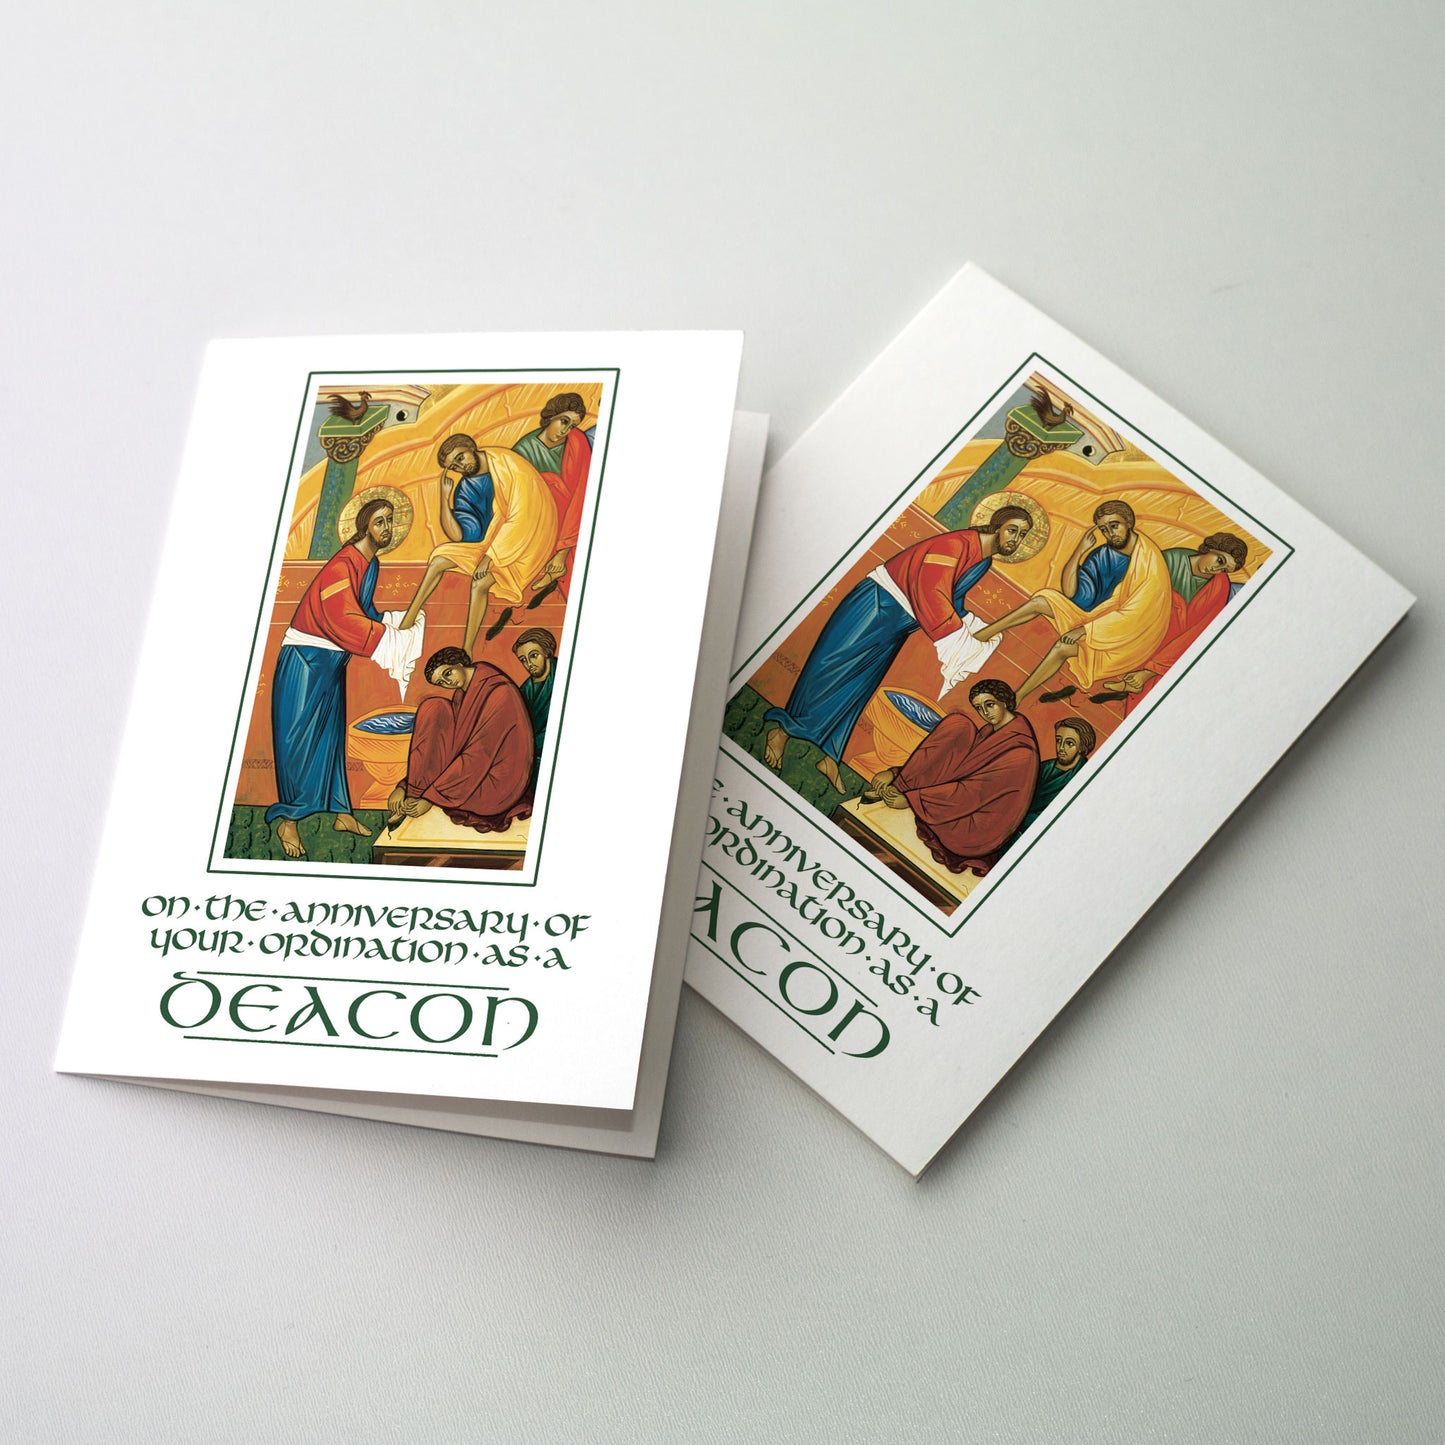 Generous and Devoted Service - Deacon Anniversary Card